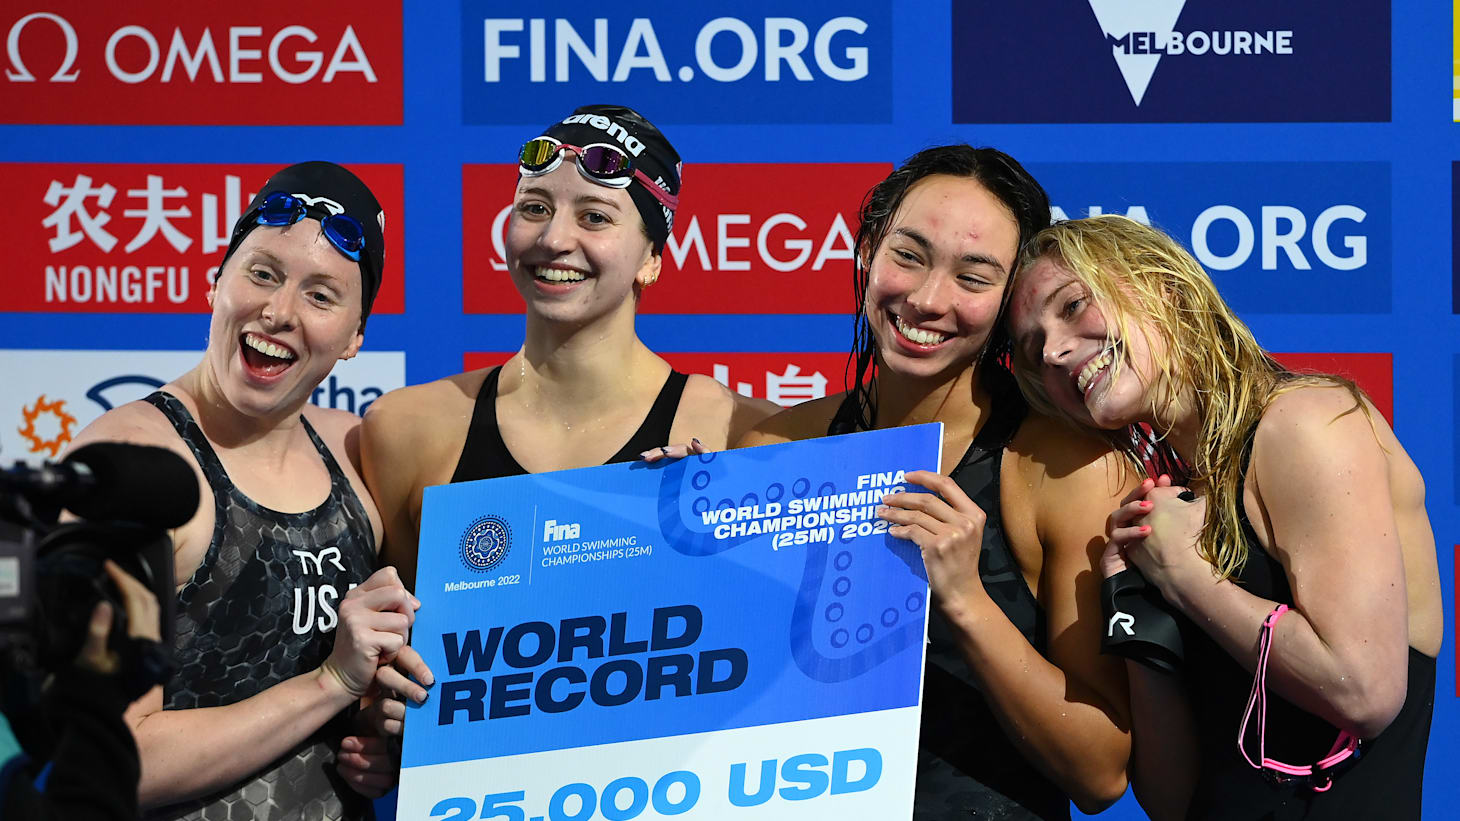 FINA short course World Swimming Championships 2022 All results and medal winners